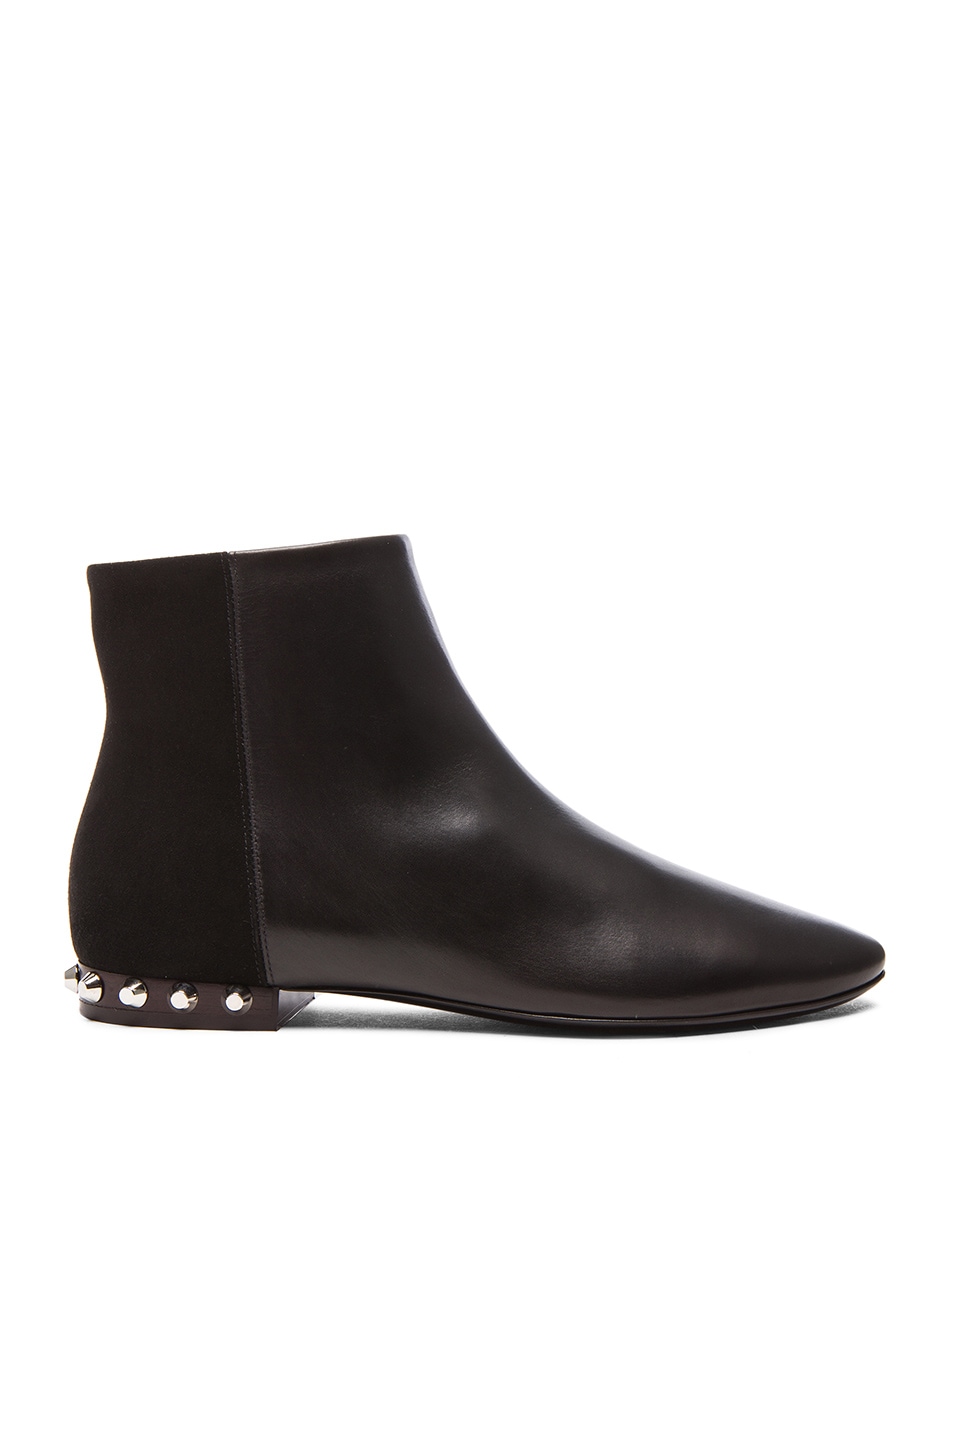 Image 1 of Balenciaga Studded Heel Leather & Suede Boots in Black